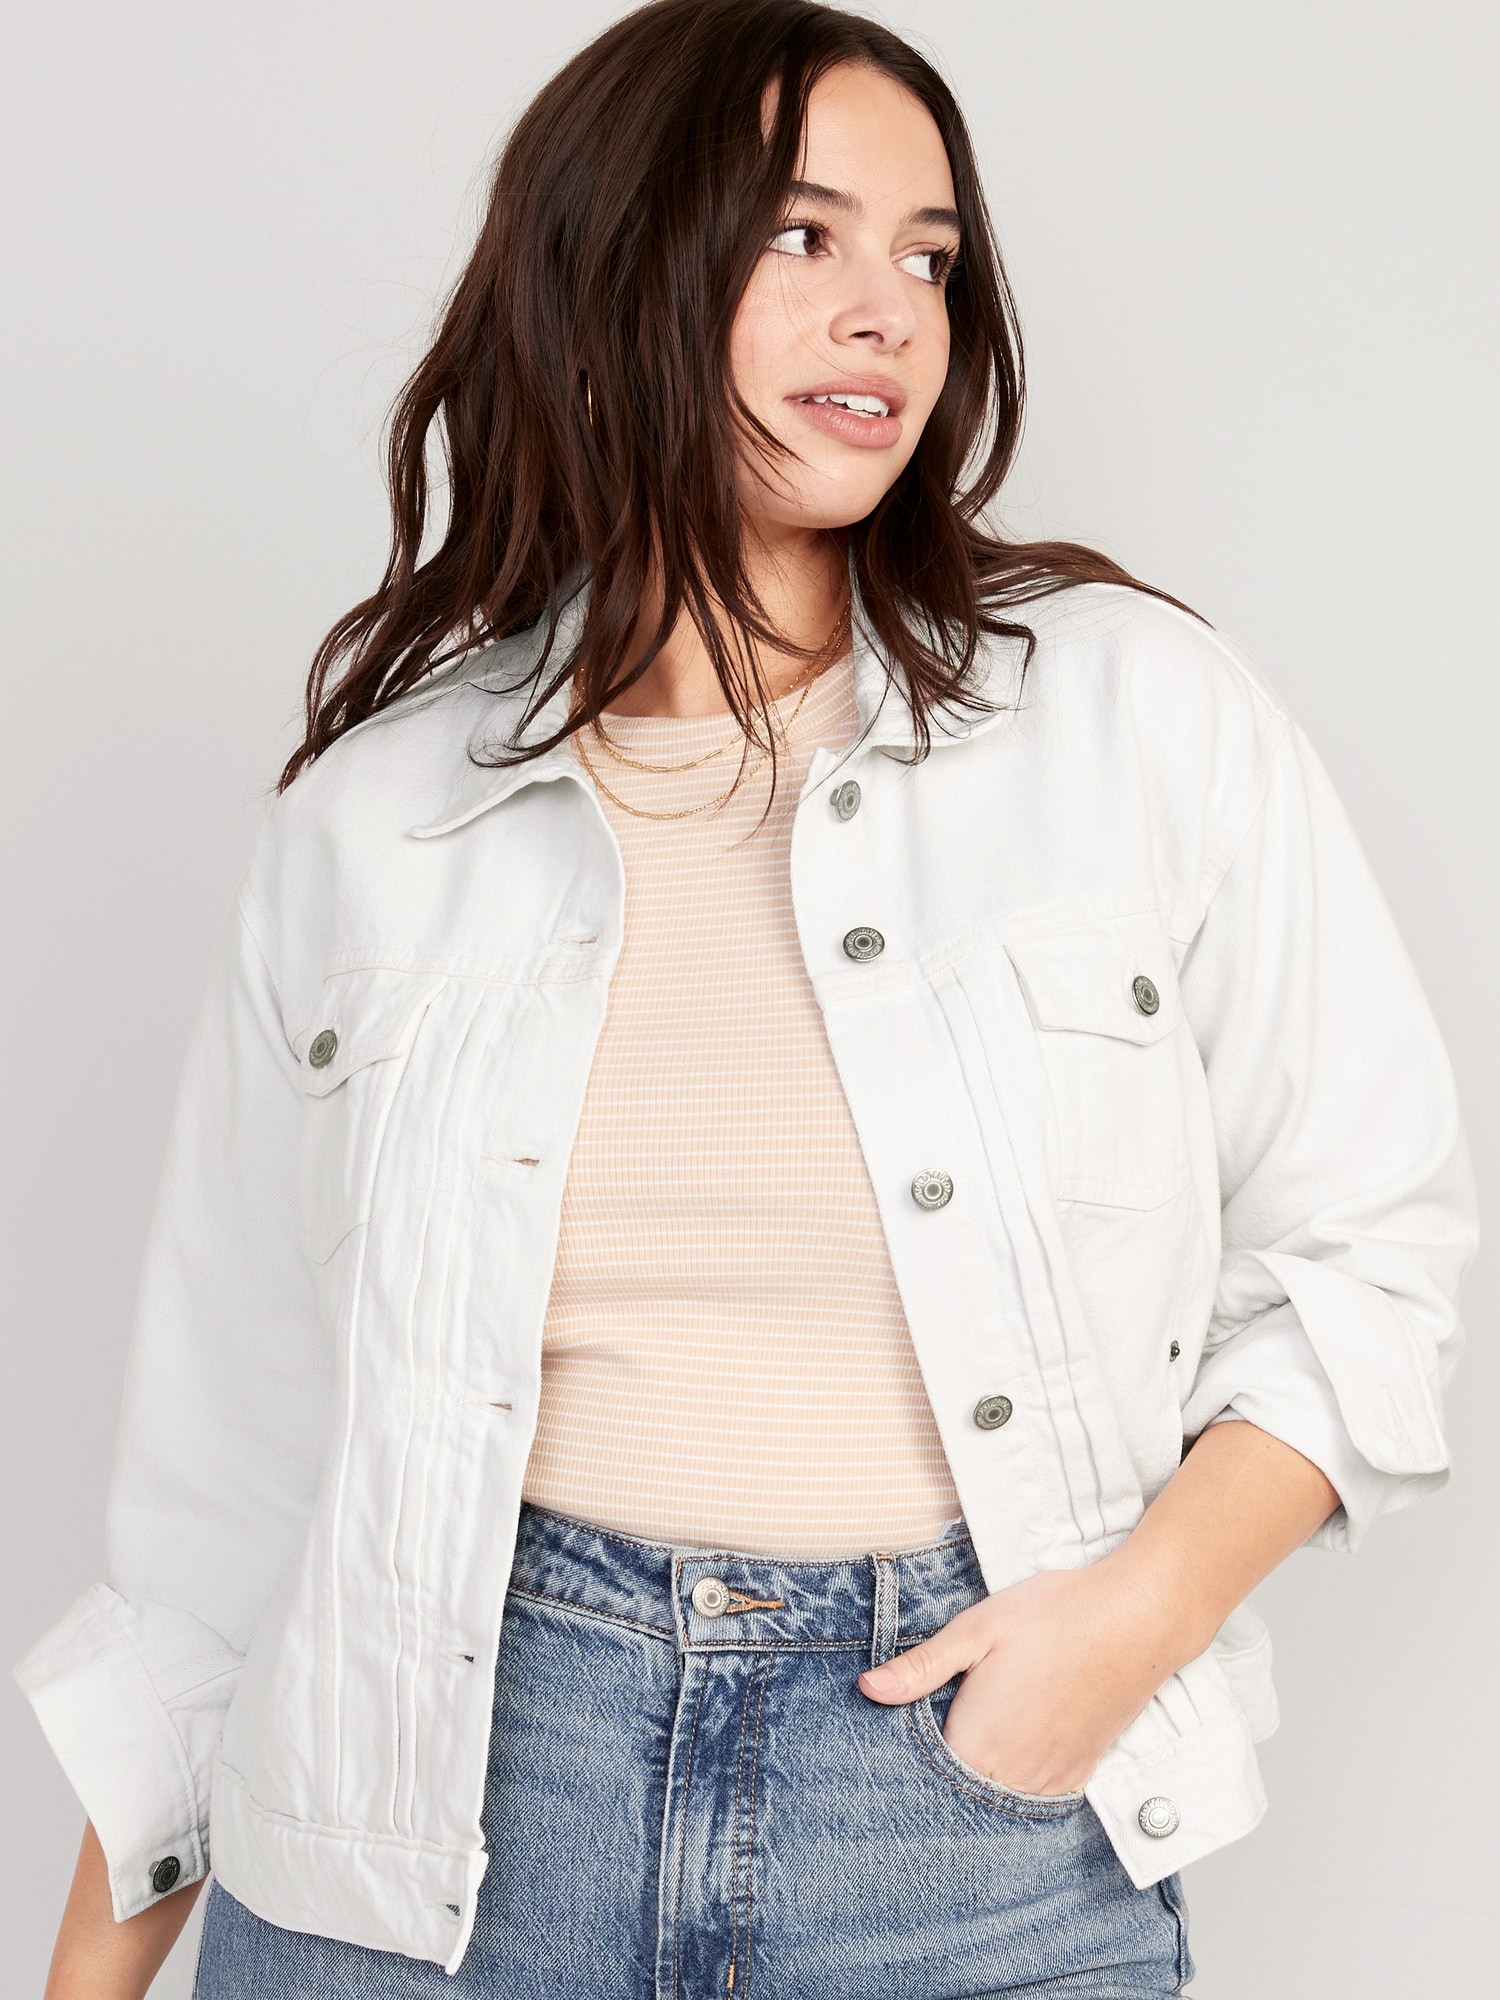 Classic White Jean Jacket for Women | Old Navy